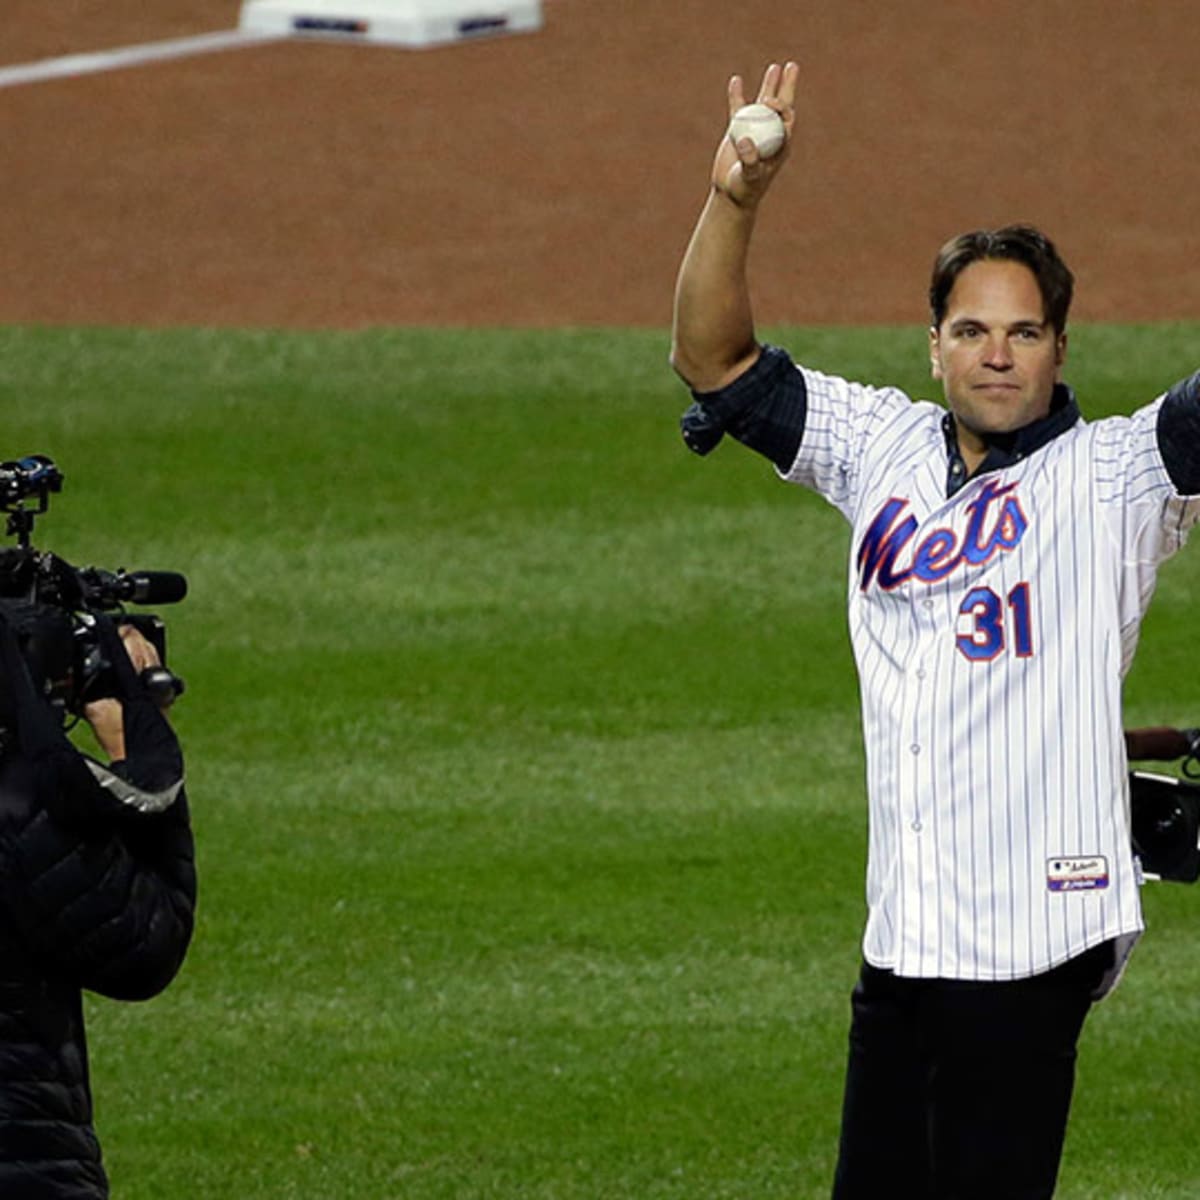 If the Mets are willing to sell Mike Piazza's 9/11 jersey, here